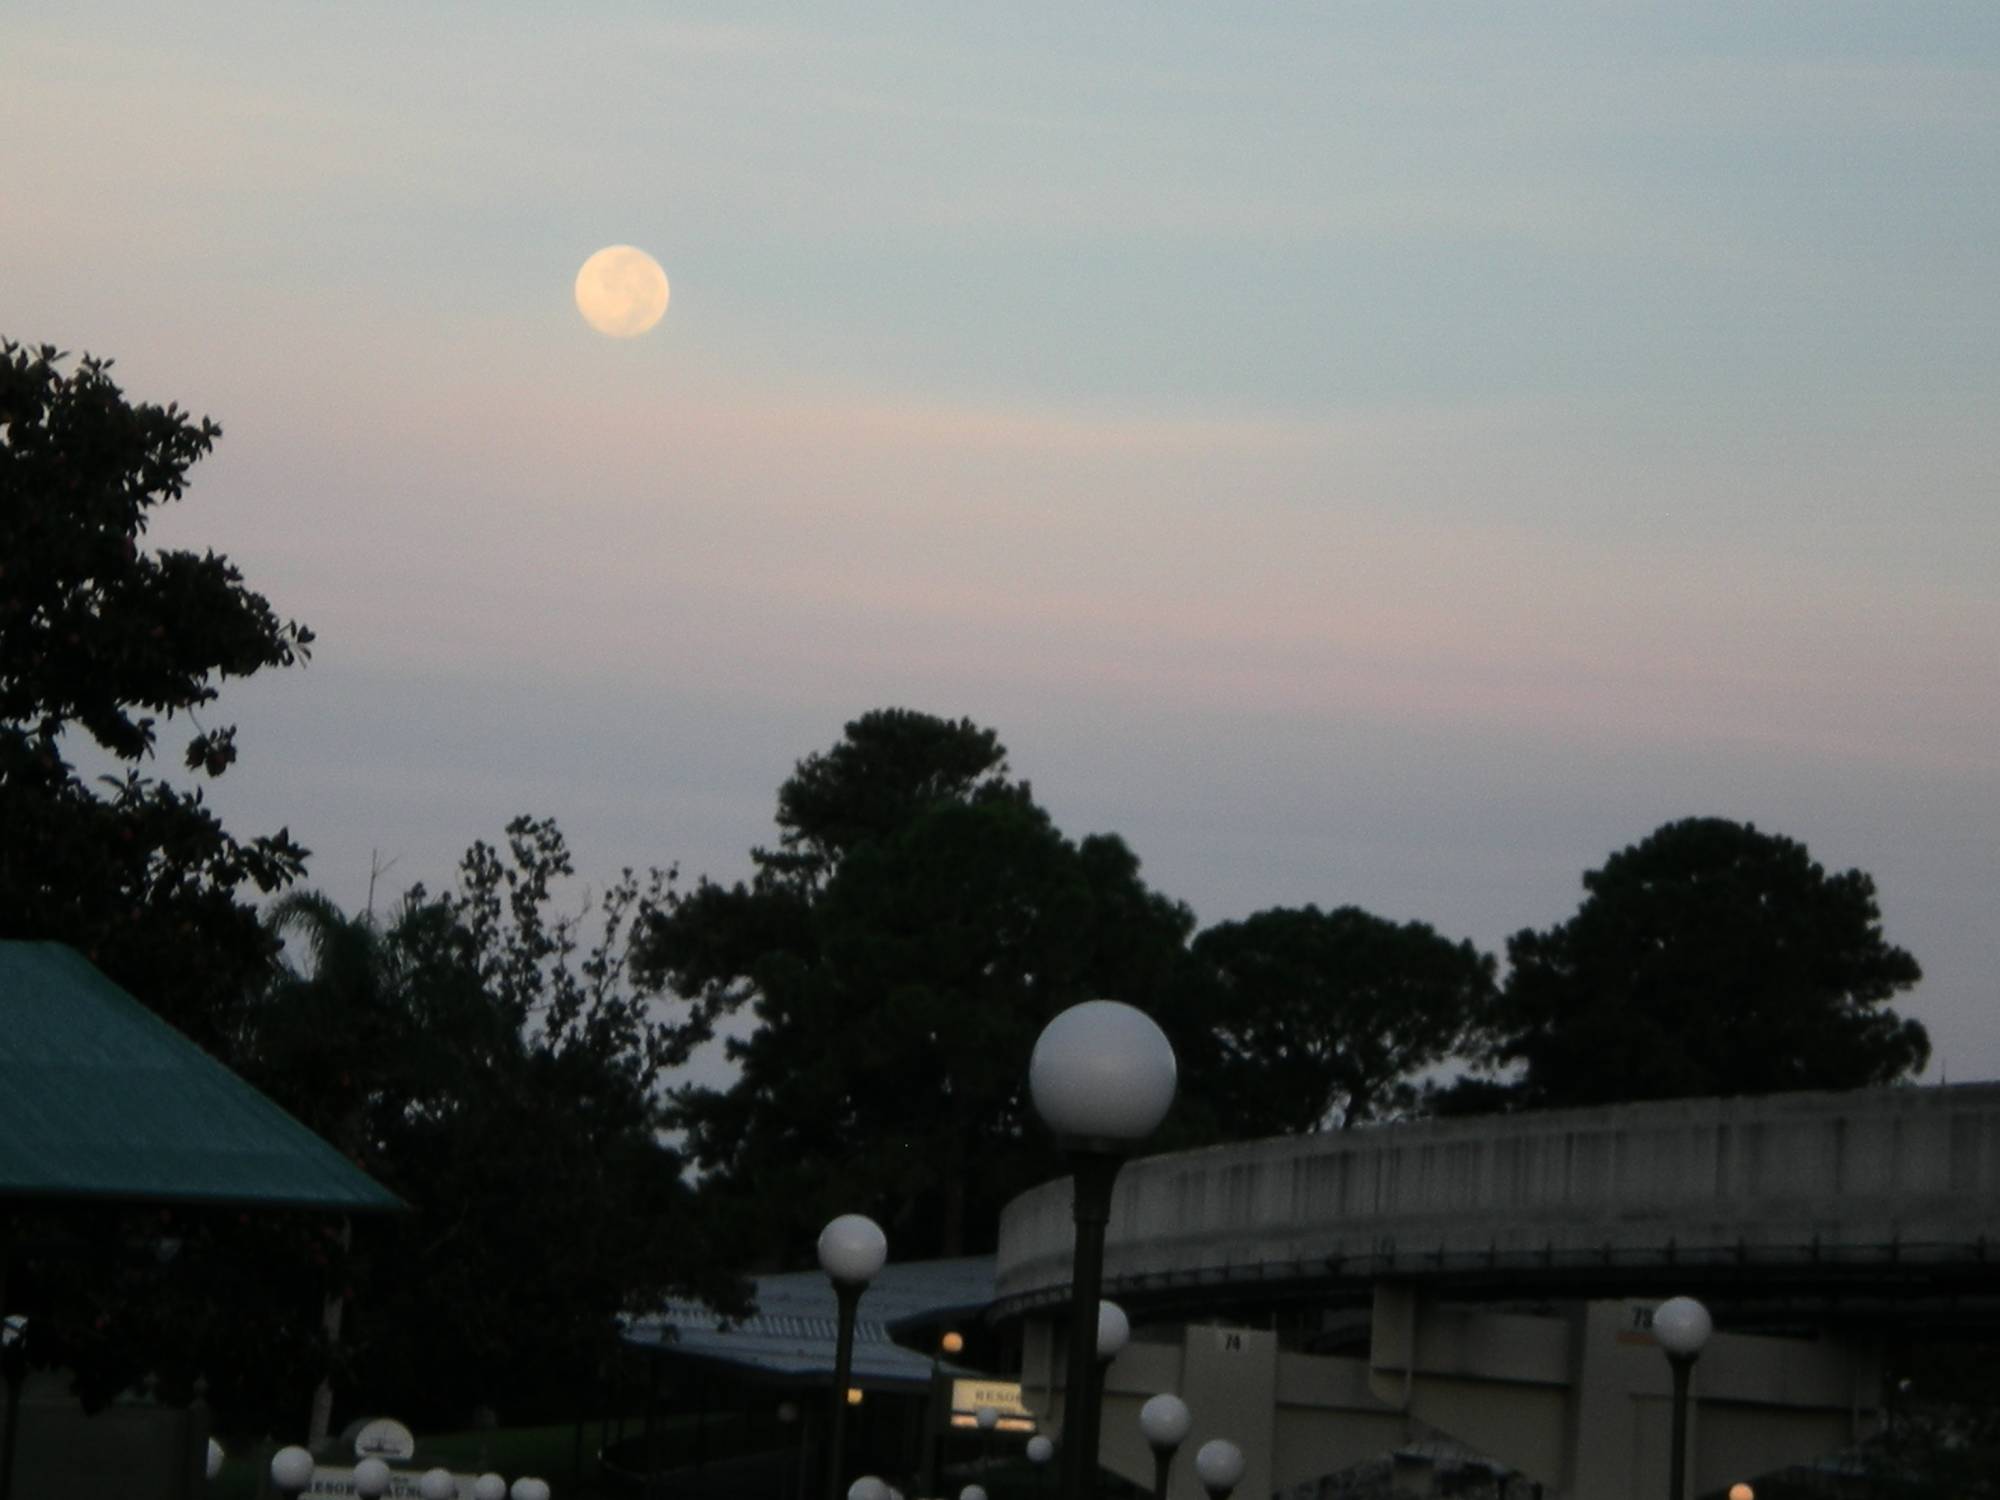 Moon over monorail